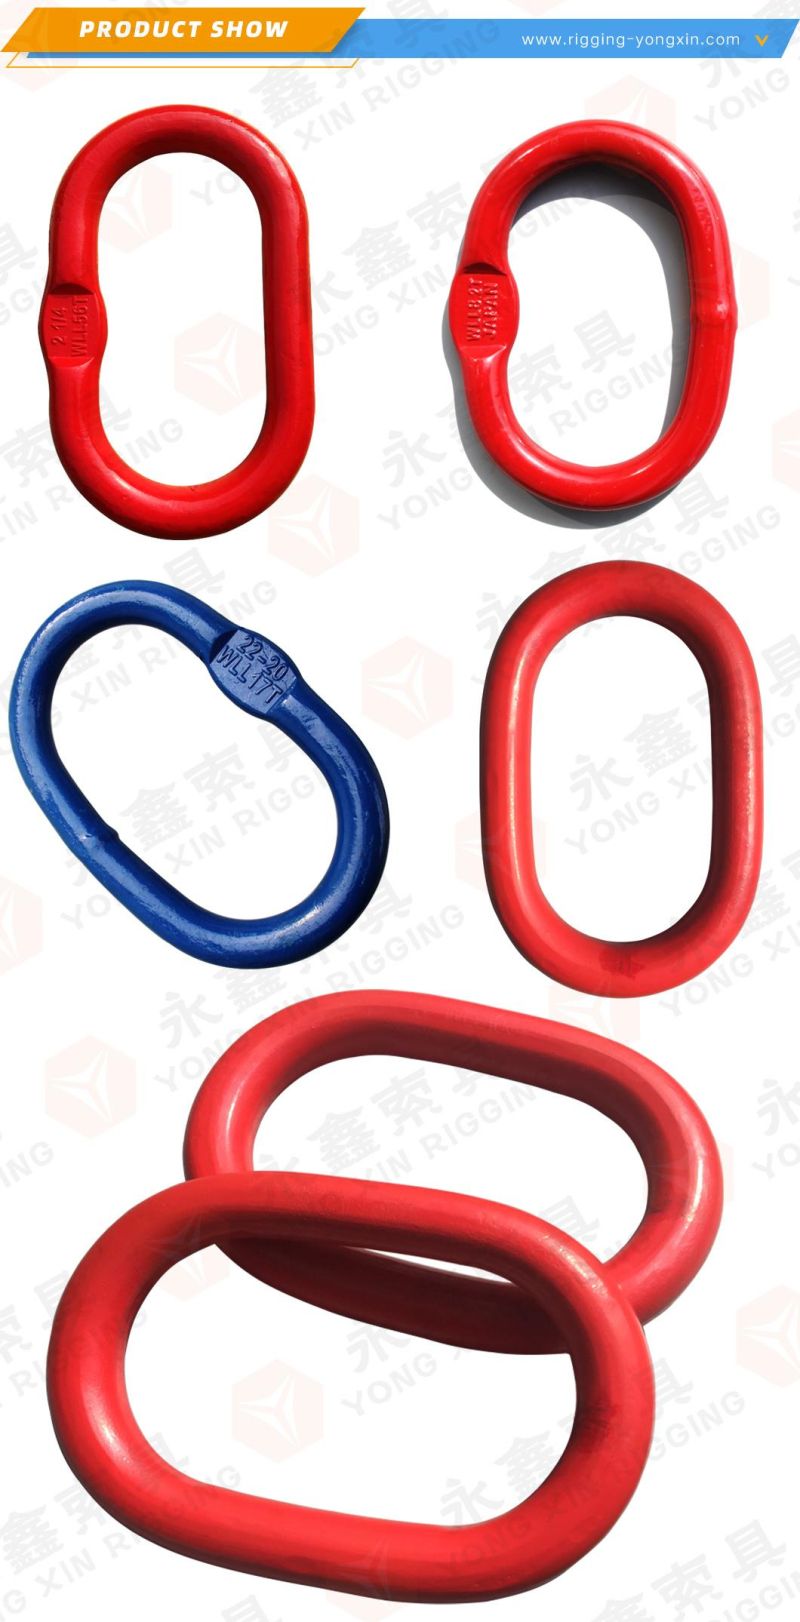 Low Price G80 European Type Master Link for Lifting Chain Sling